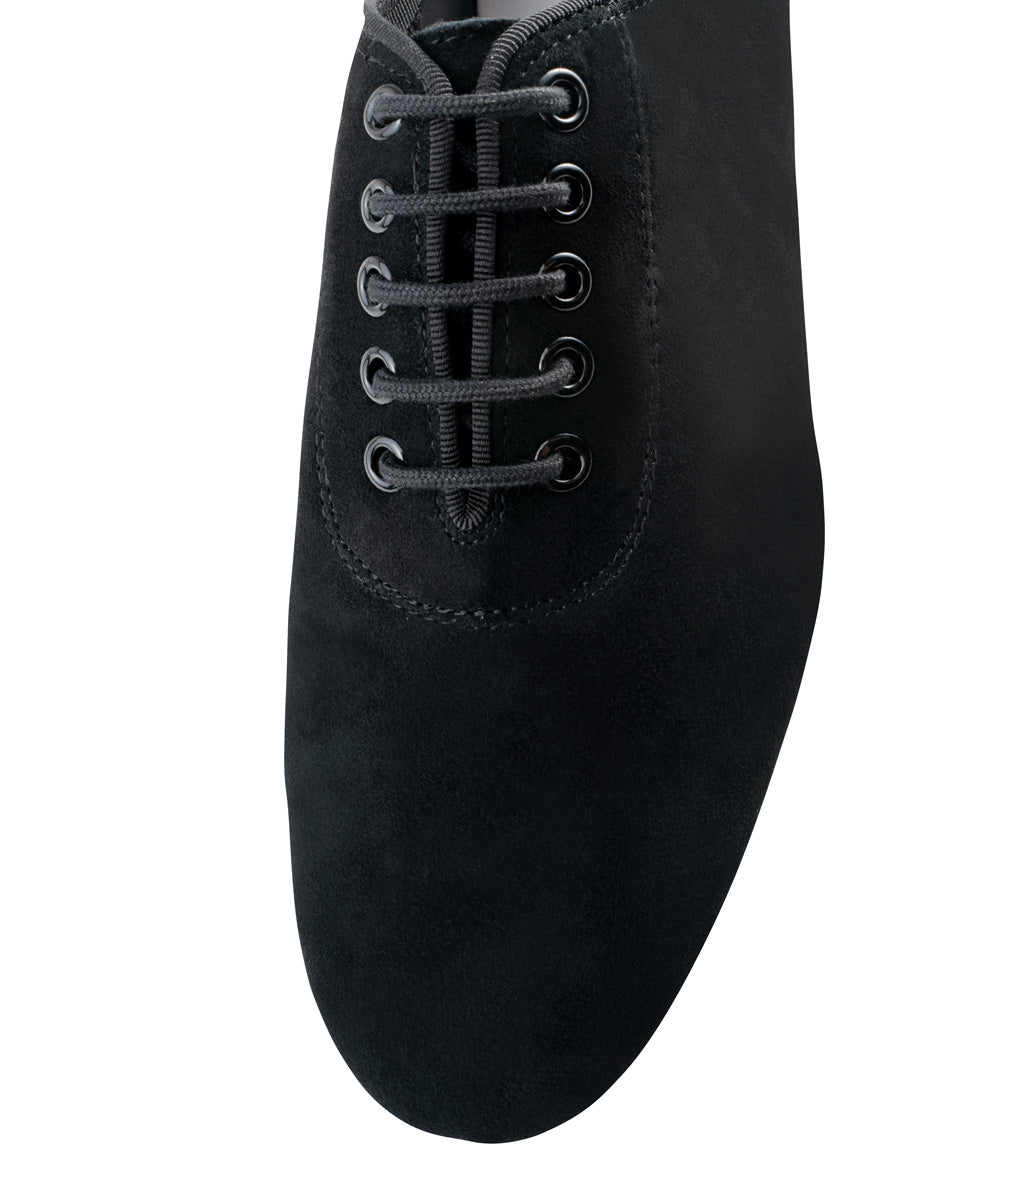 Werner Kern Babette Ladies Practice Shoes in Black Suede with Breathable and Moisture-Absorbent Leather Lining